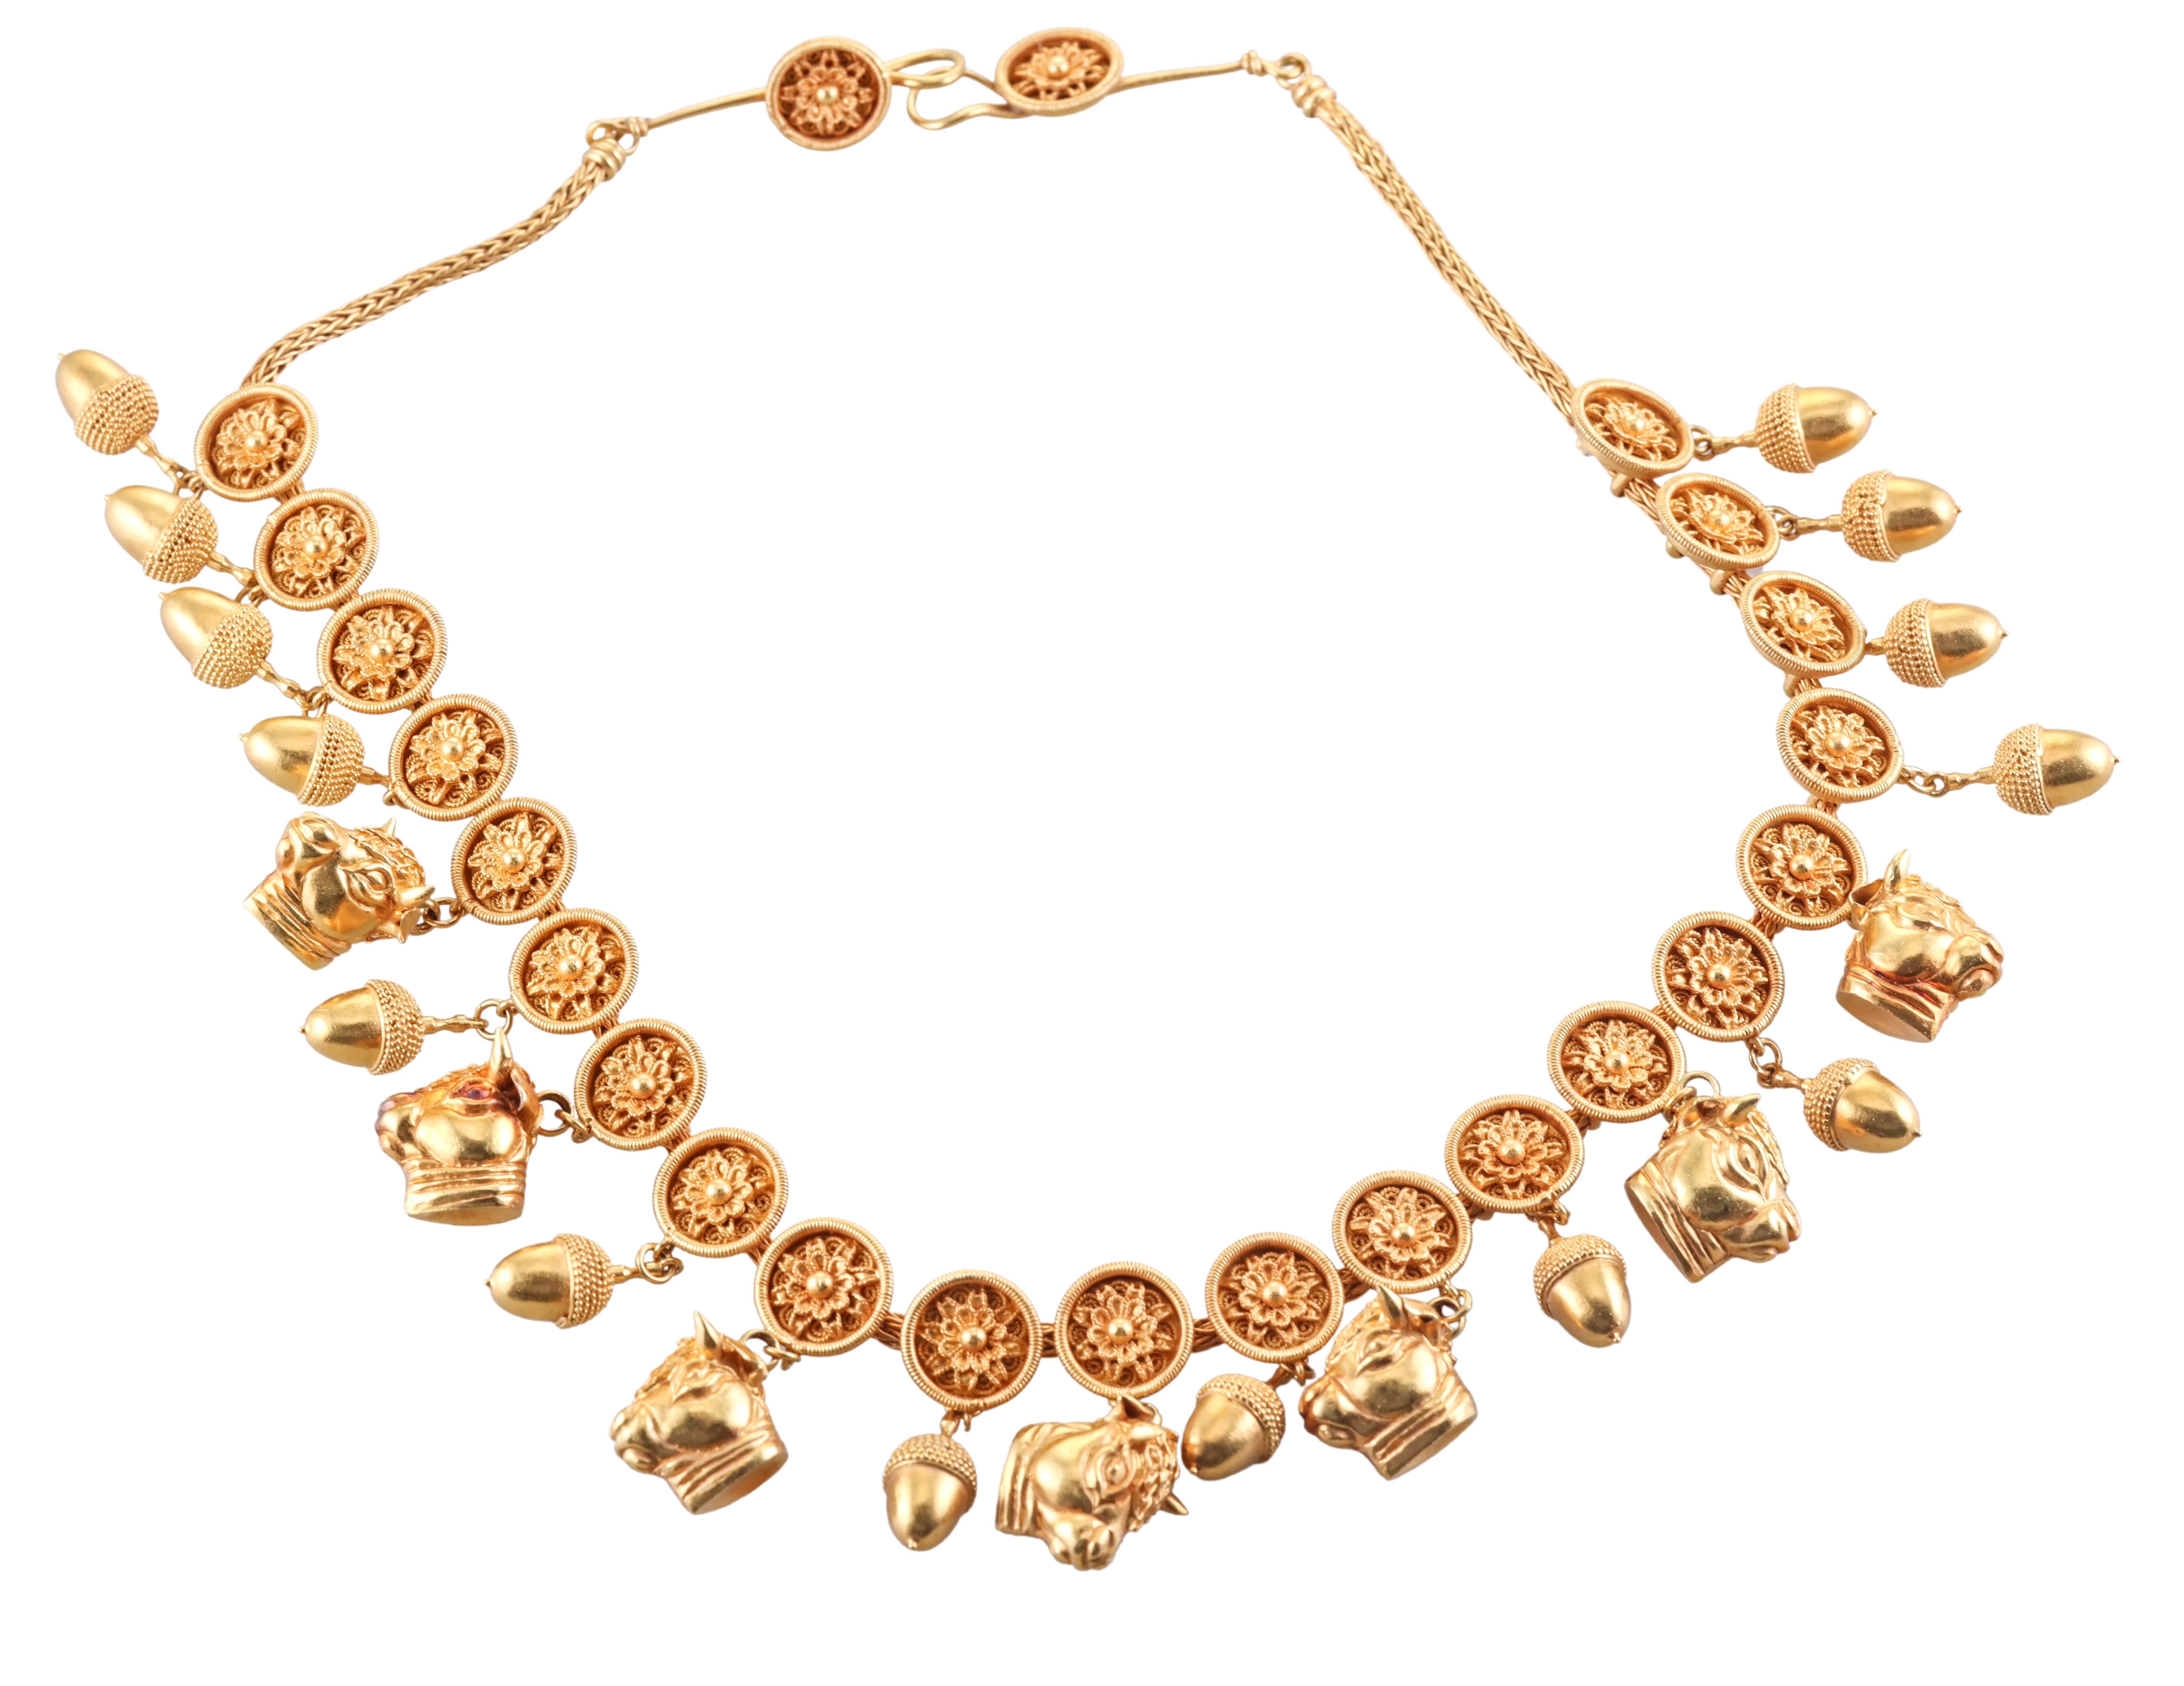 Iconic 22k yellow gold necklace by Ilias Lalaounis, one of the most prominent Greek designers to date. The necklace is featuring 21 element with a flower and a dangling acorn or bull head. Necklace is 15.5